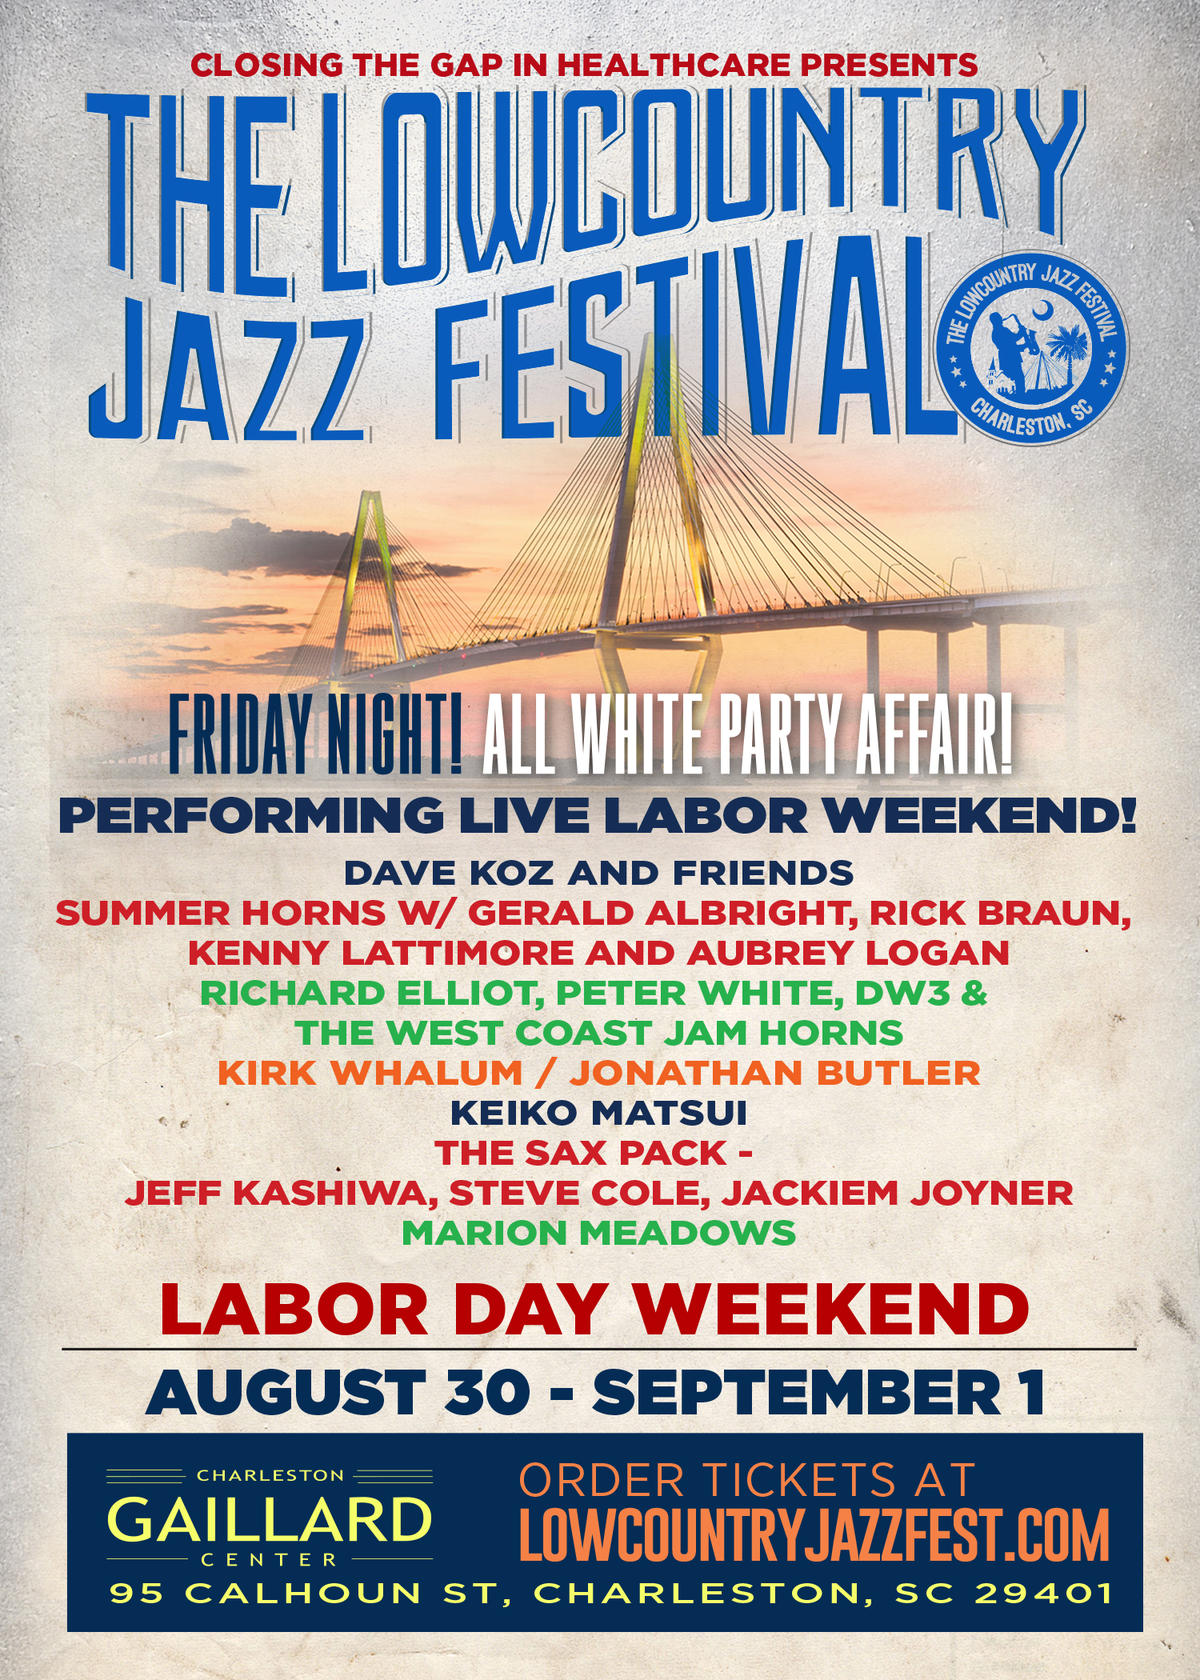 Labor Day Weekend Low Country Jazz Fest Features Koz, Albright, Whalum